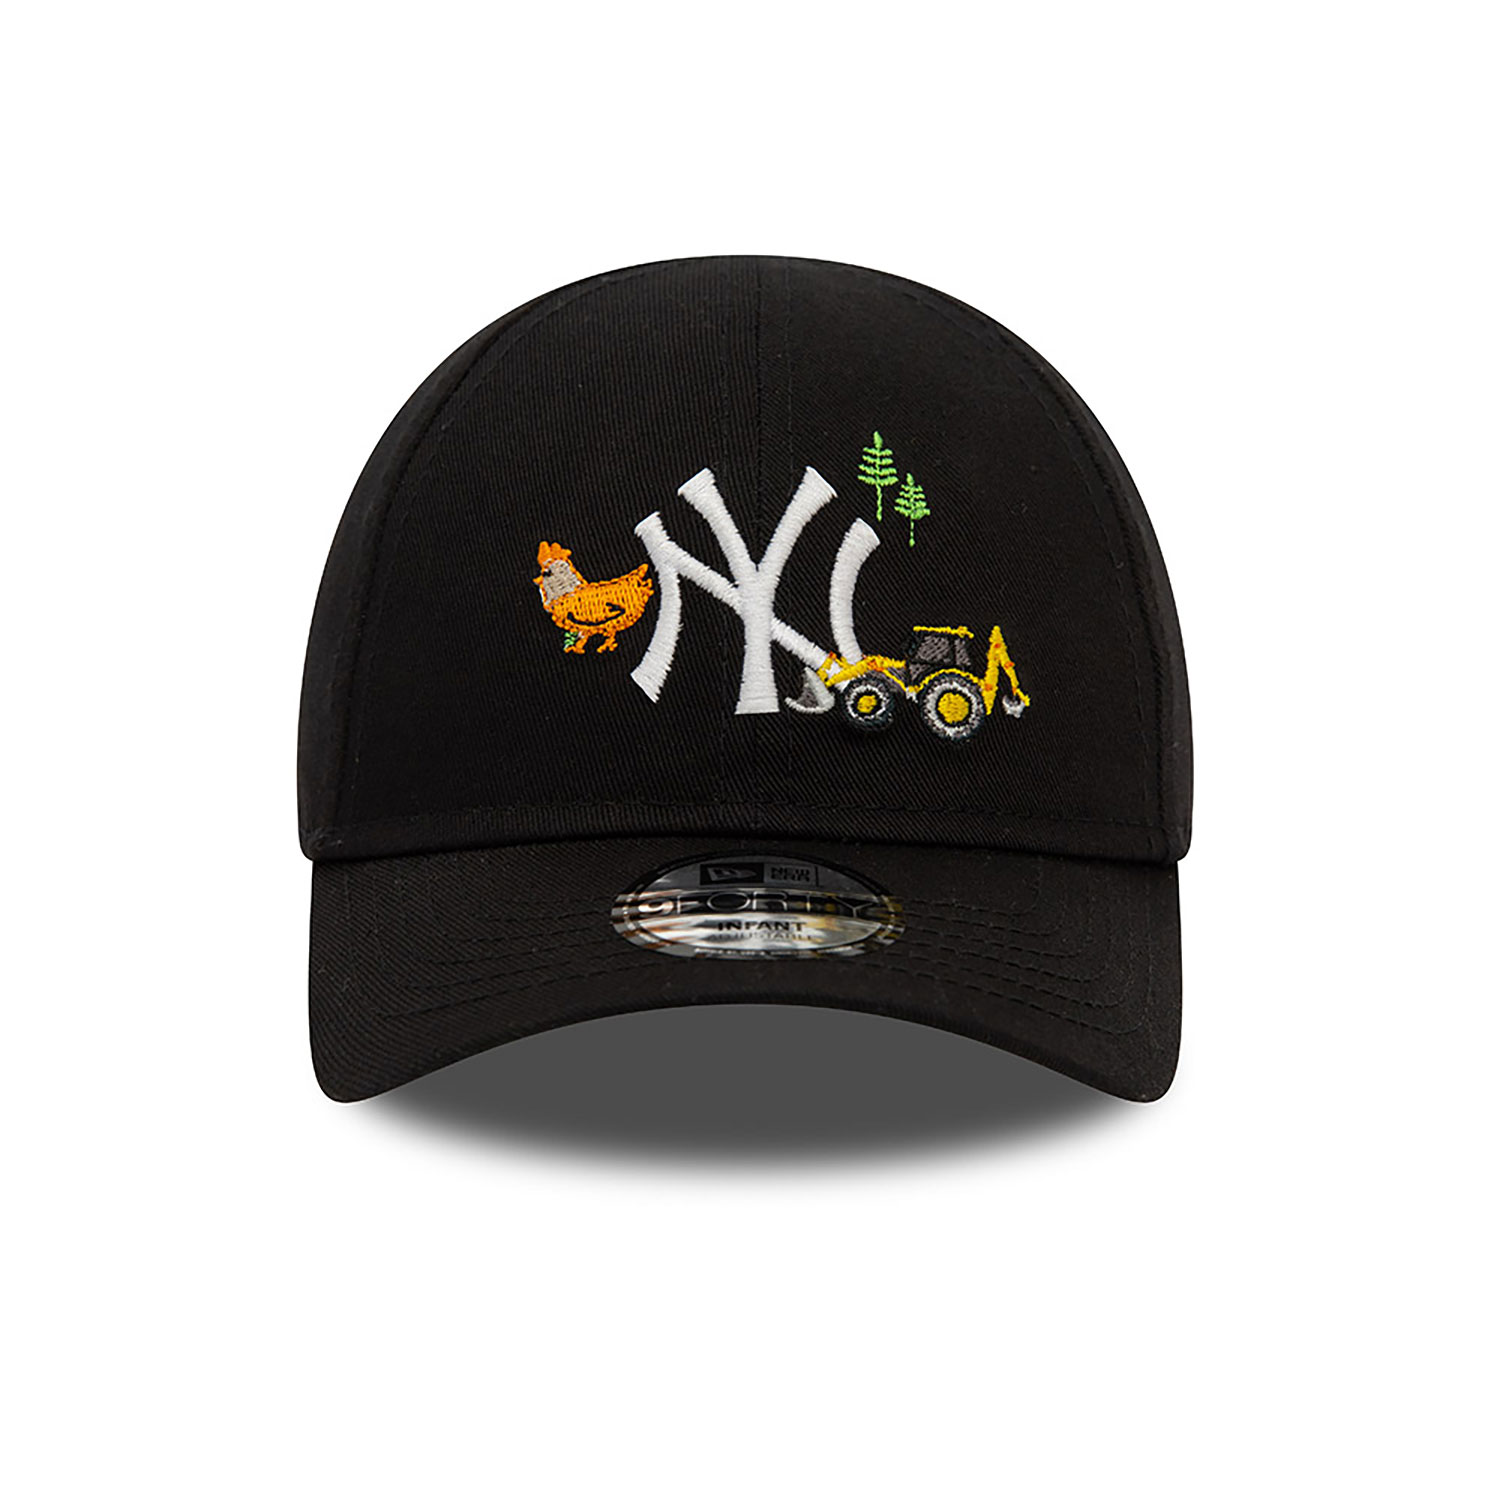 New York Yankees Infant Icon Black 9FORTY Adjustable Cap